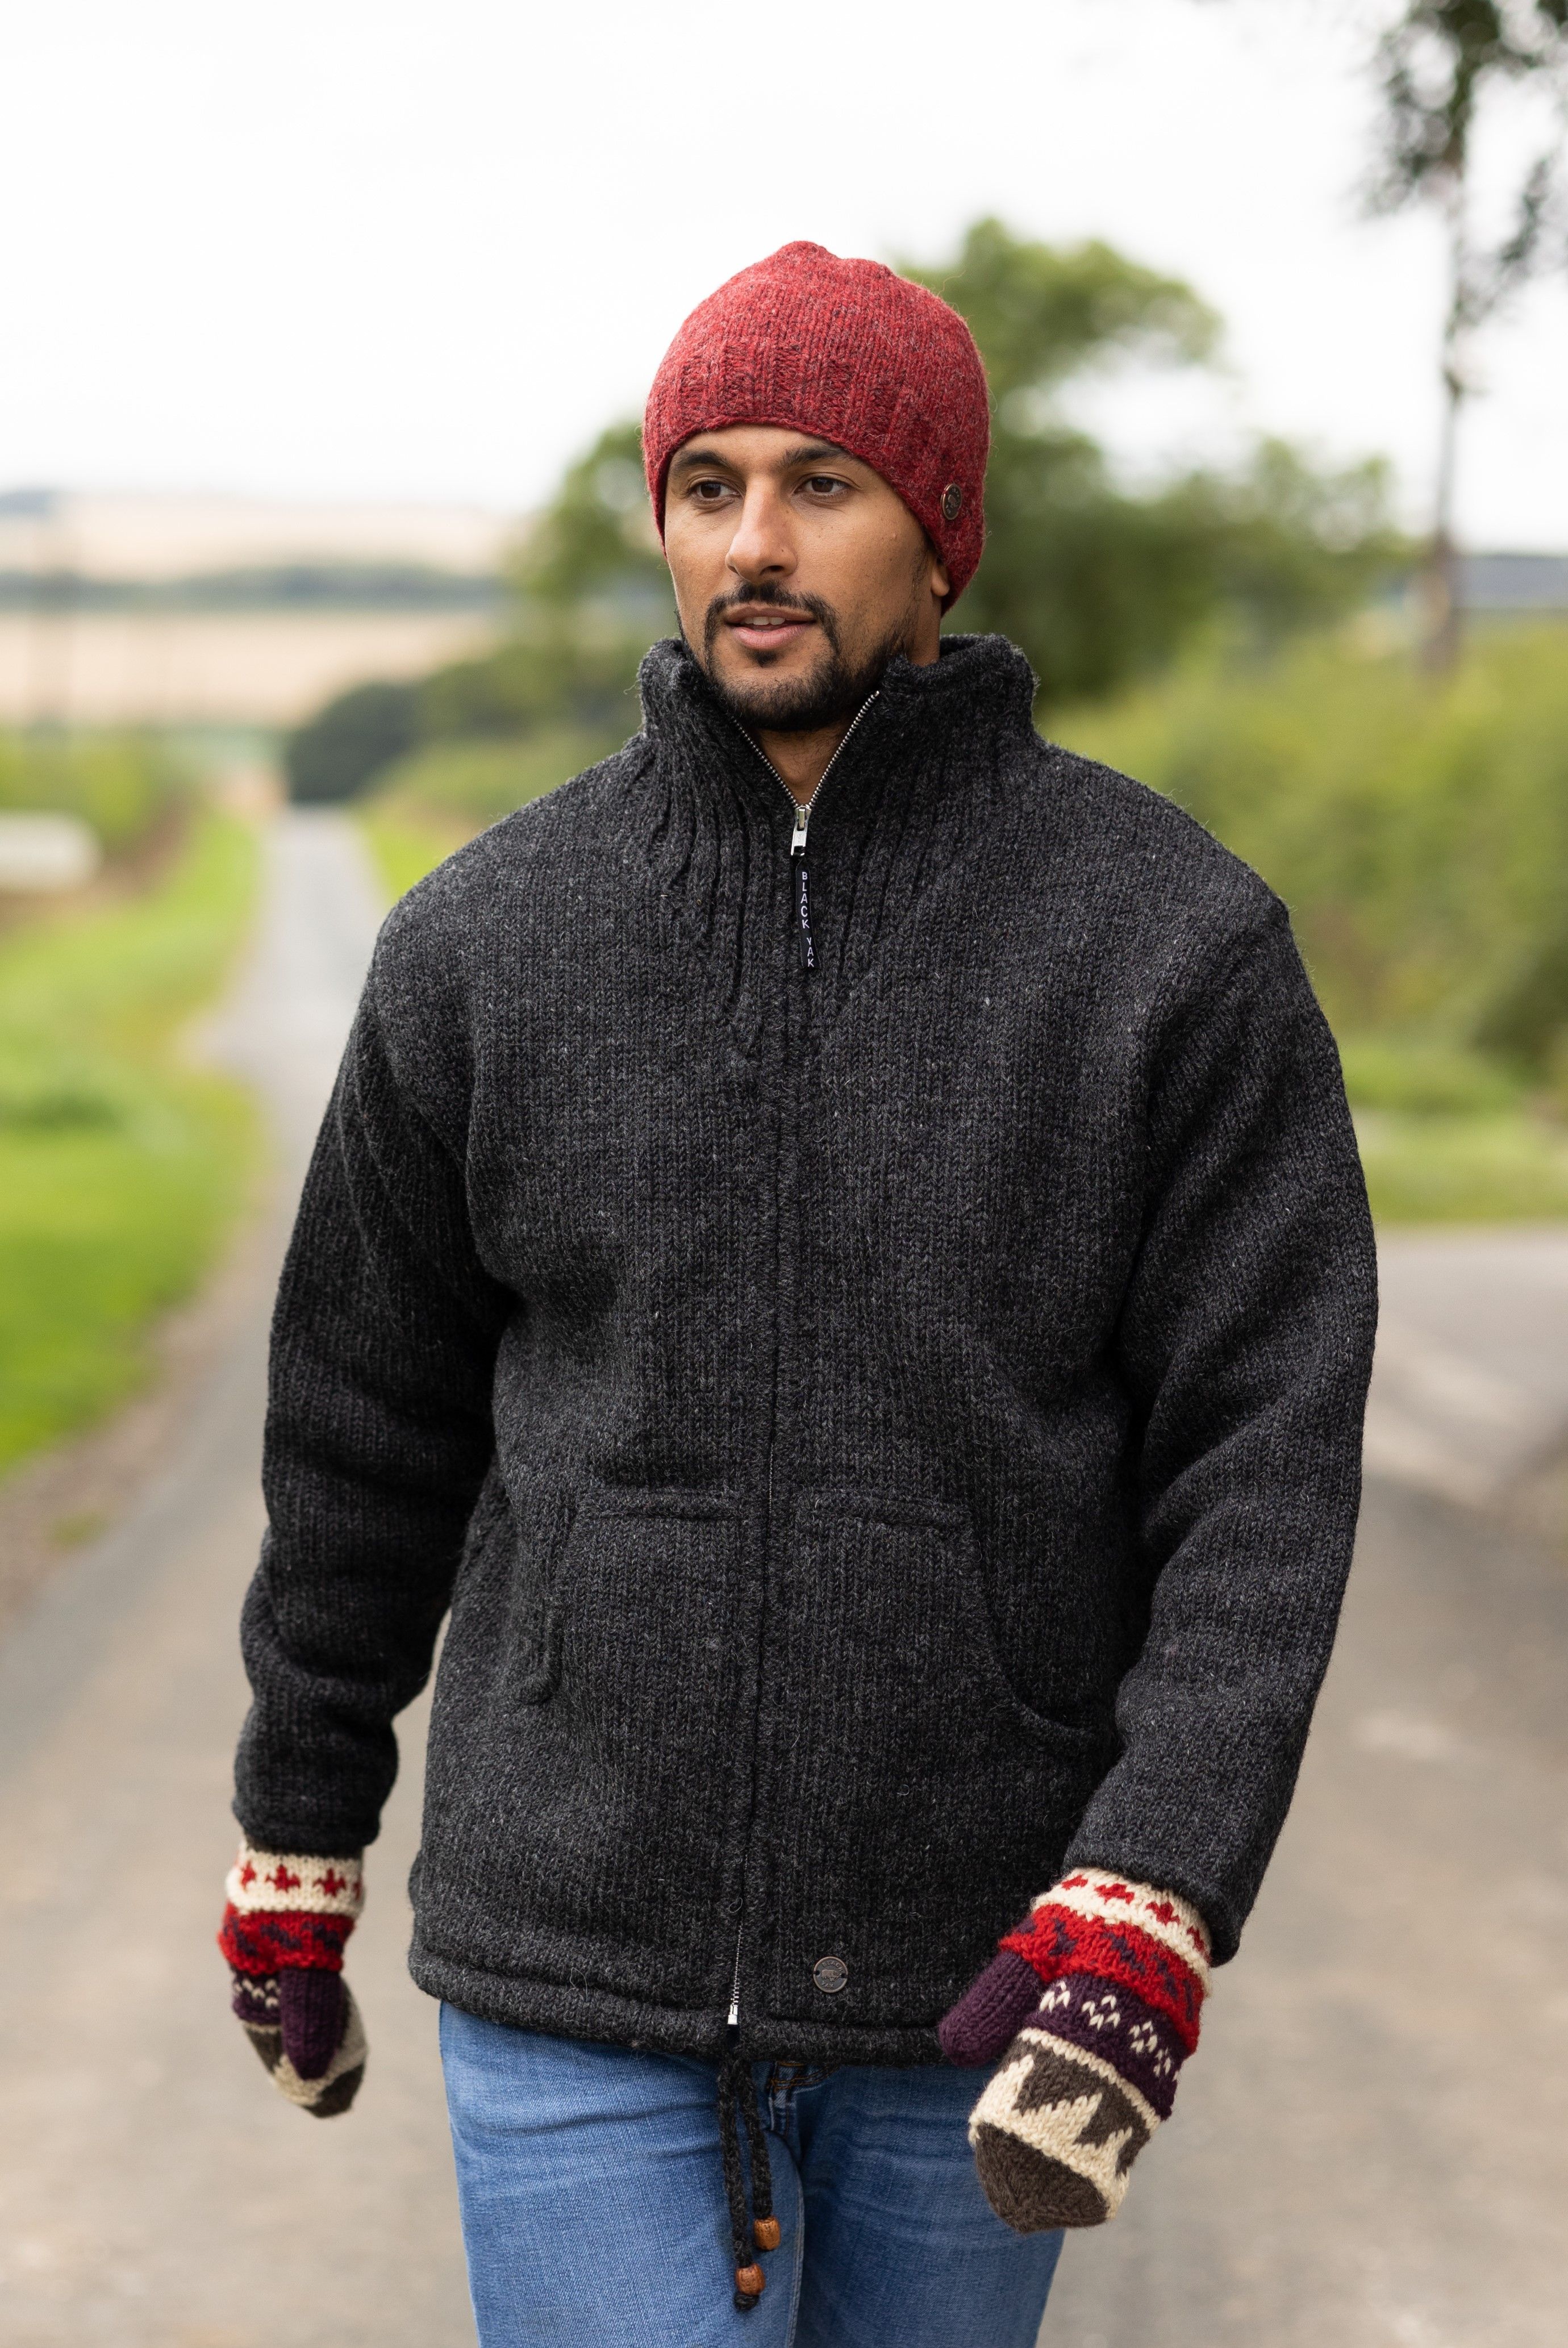 Classic, charcoal fully lined jacket worn with red pepper beanie and patterned mittens